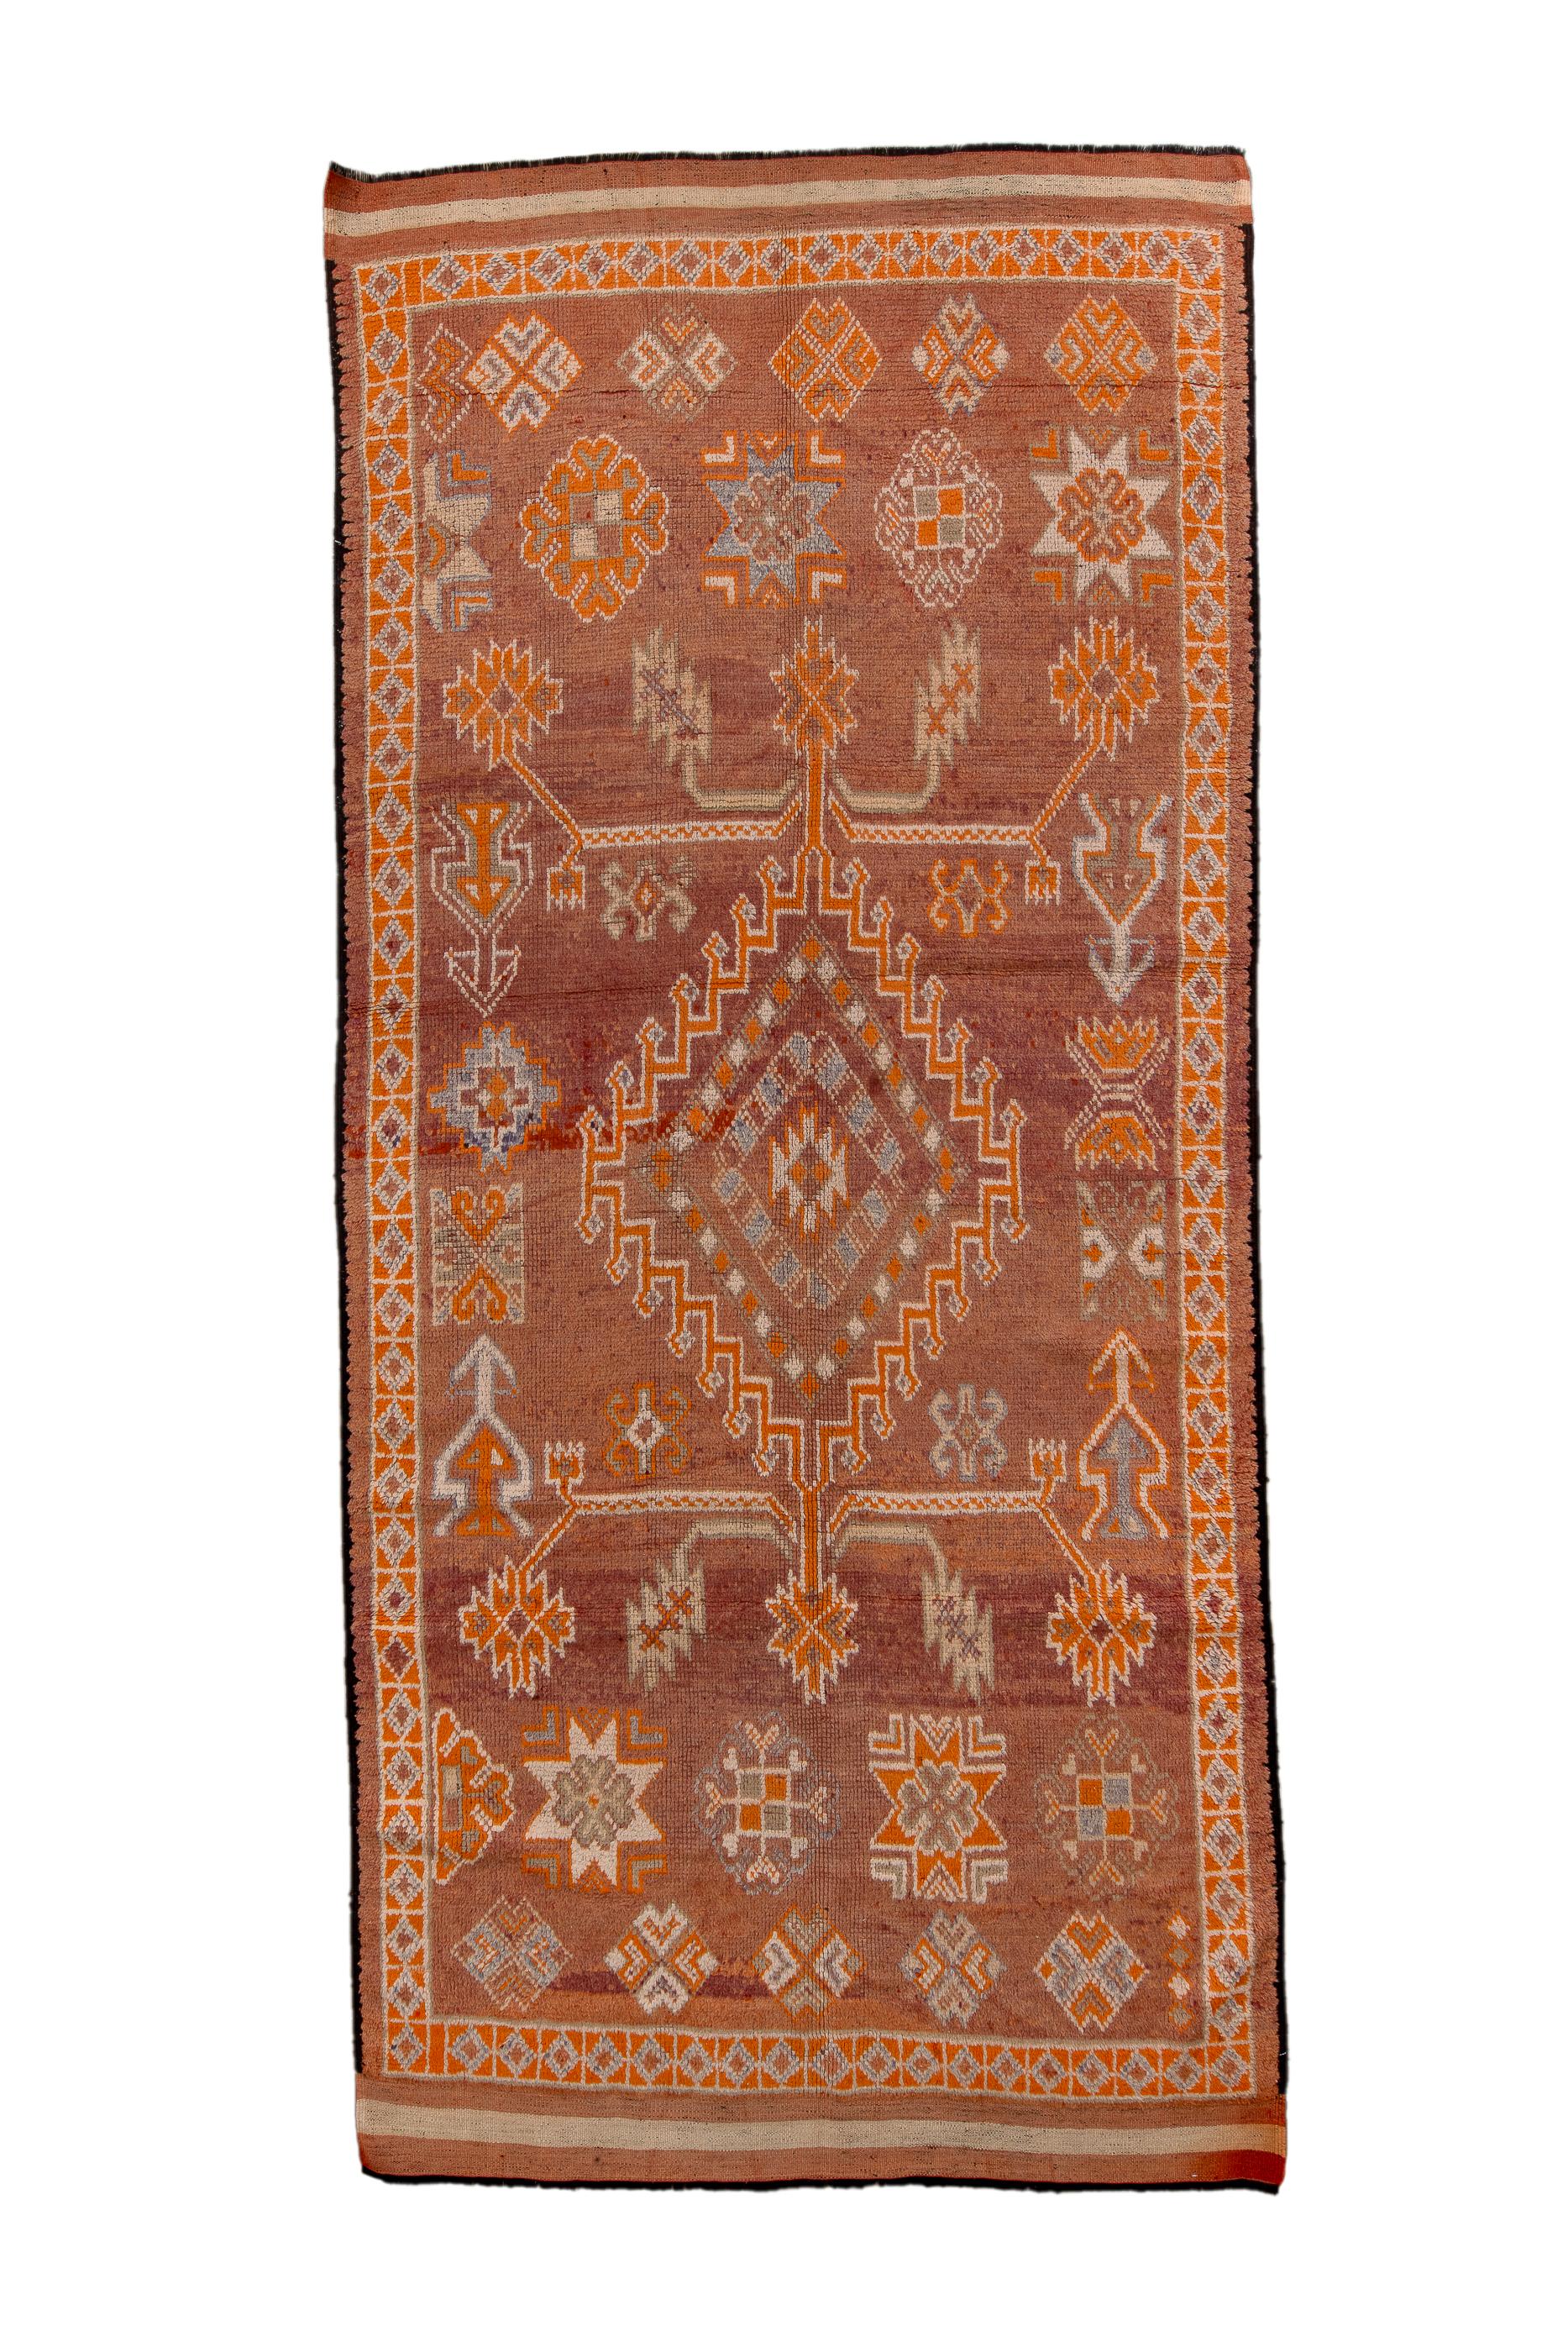 The rust madder field shows a stepped and fringed medallion bracketed by leafy branches, and surrounded by various eight point stars, and four blossom motives, all taken from Turkish village rugs.  Main narrow ivory border of squares with diamonds